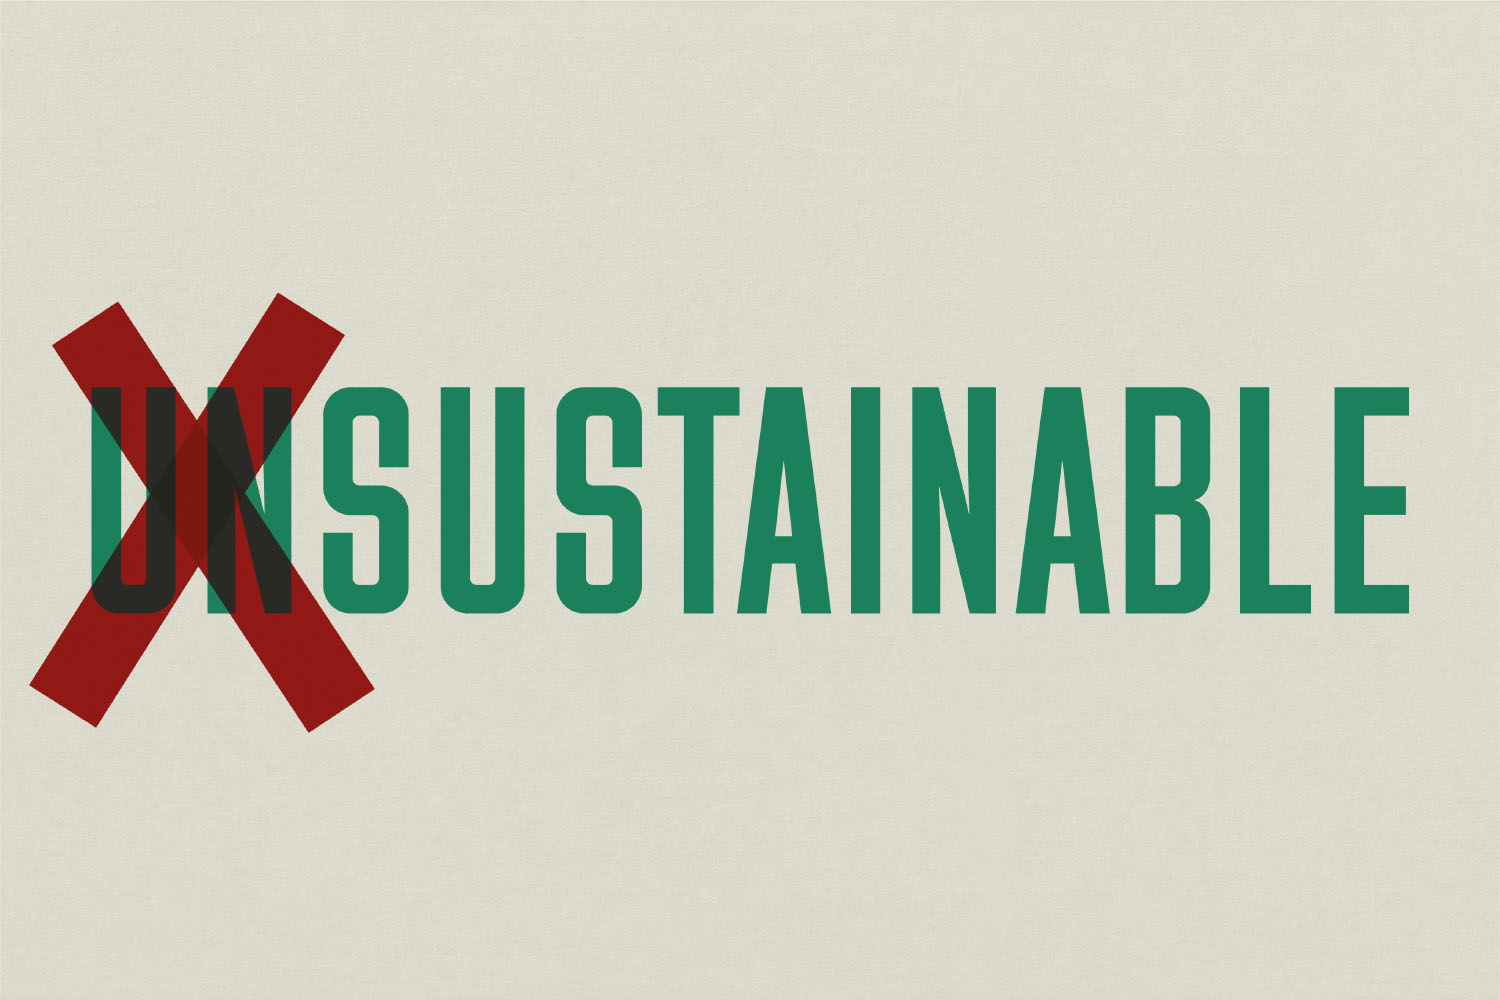 The word 'unsustainable' with the first two letters crossed out, so it reads 'sustainable'